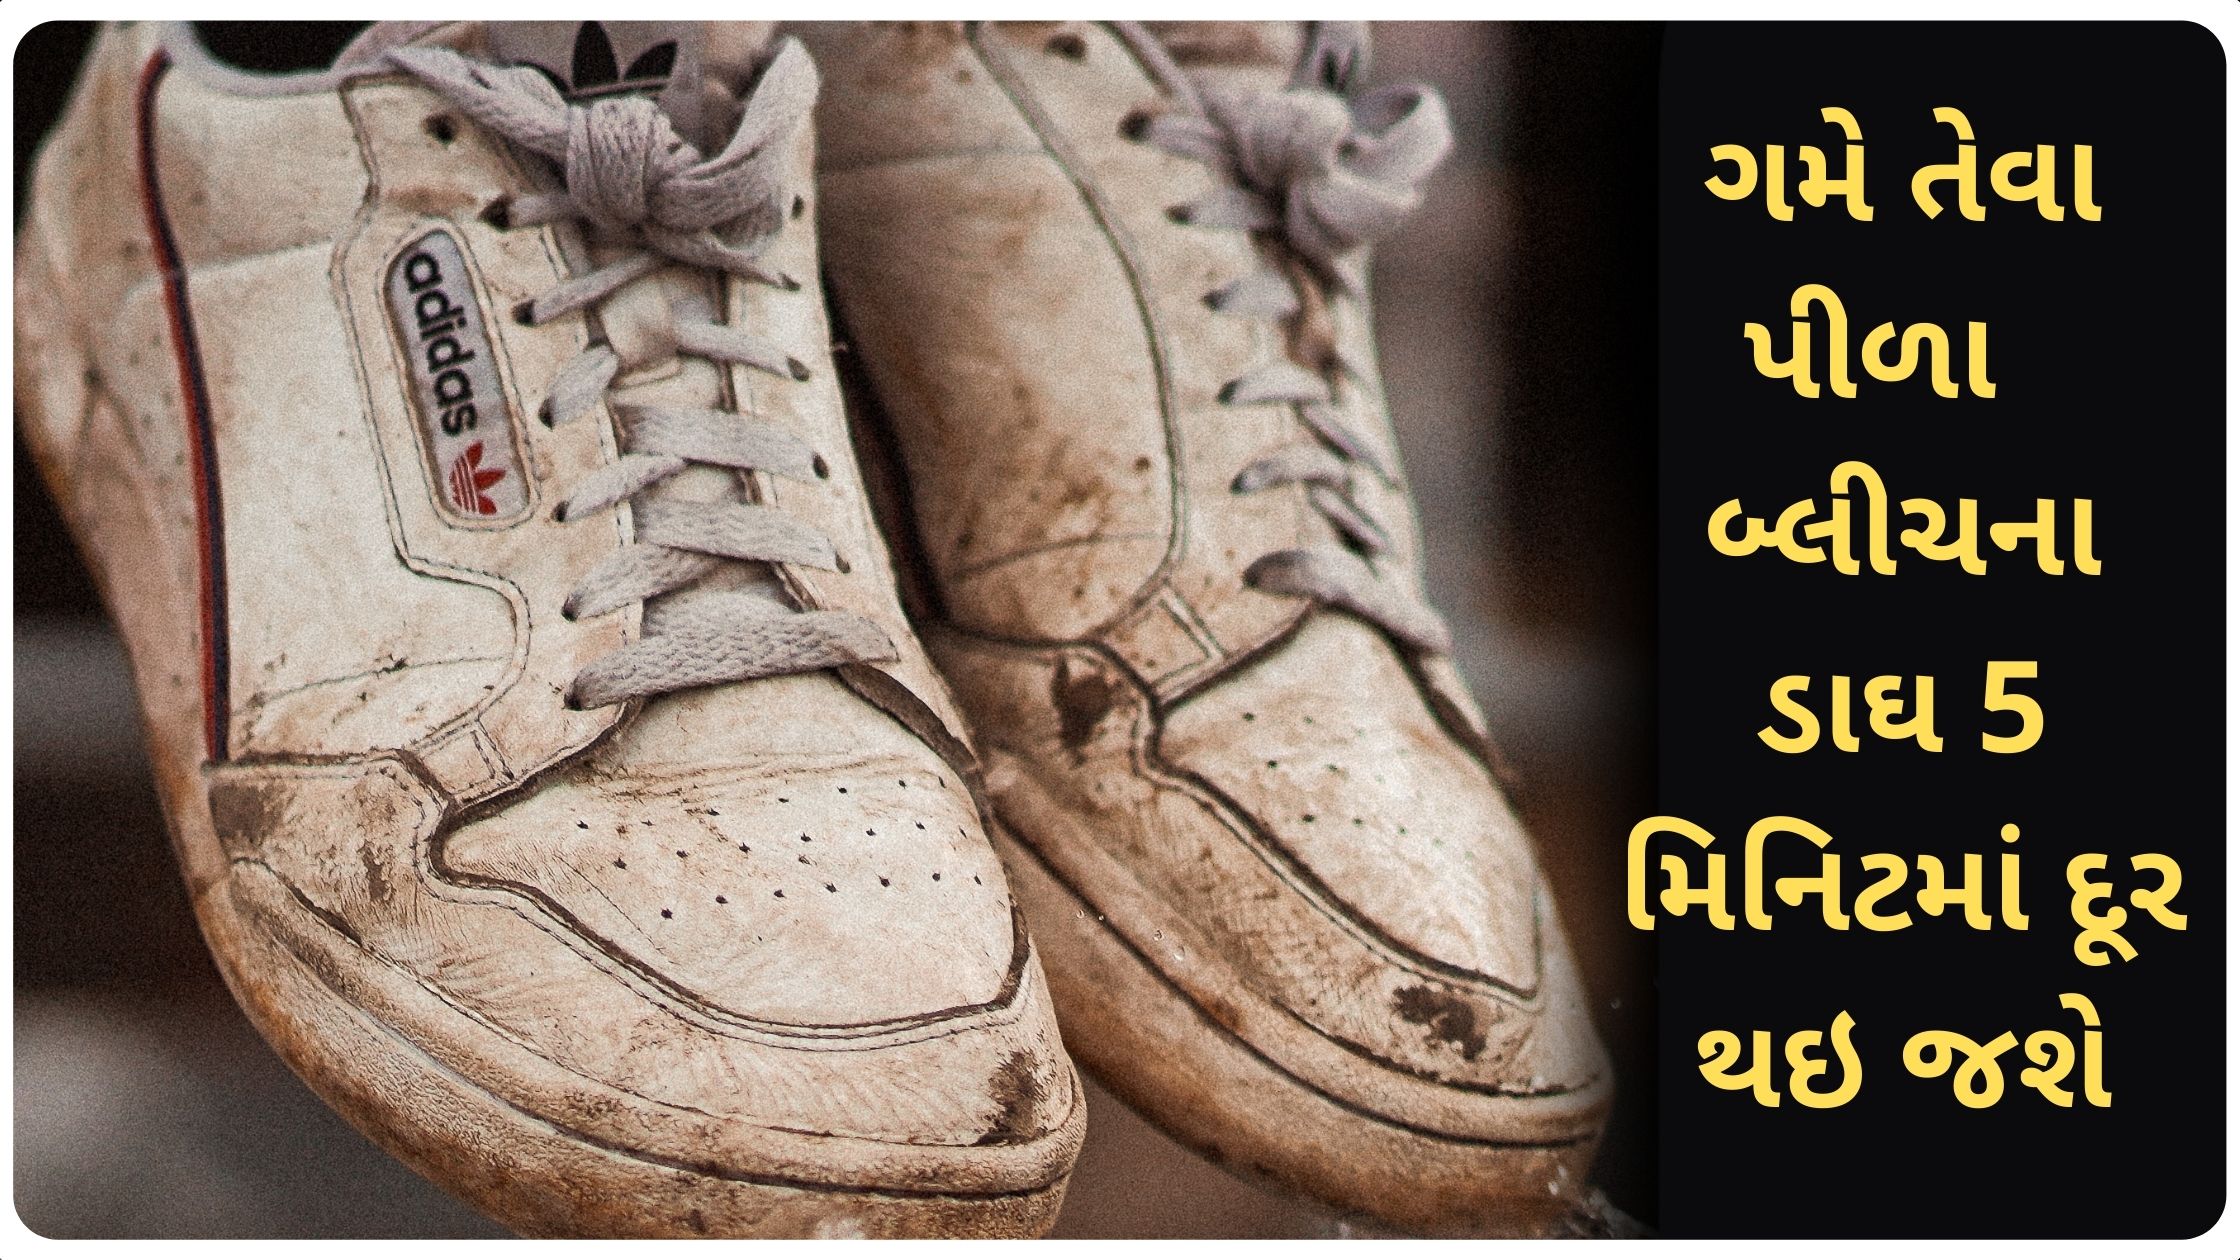 white shoes cleaning tips in gujarati